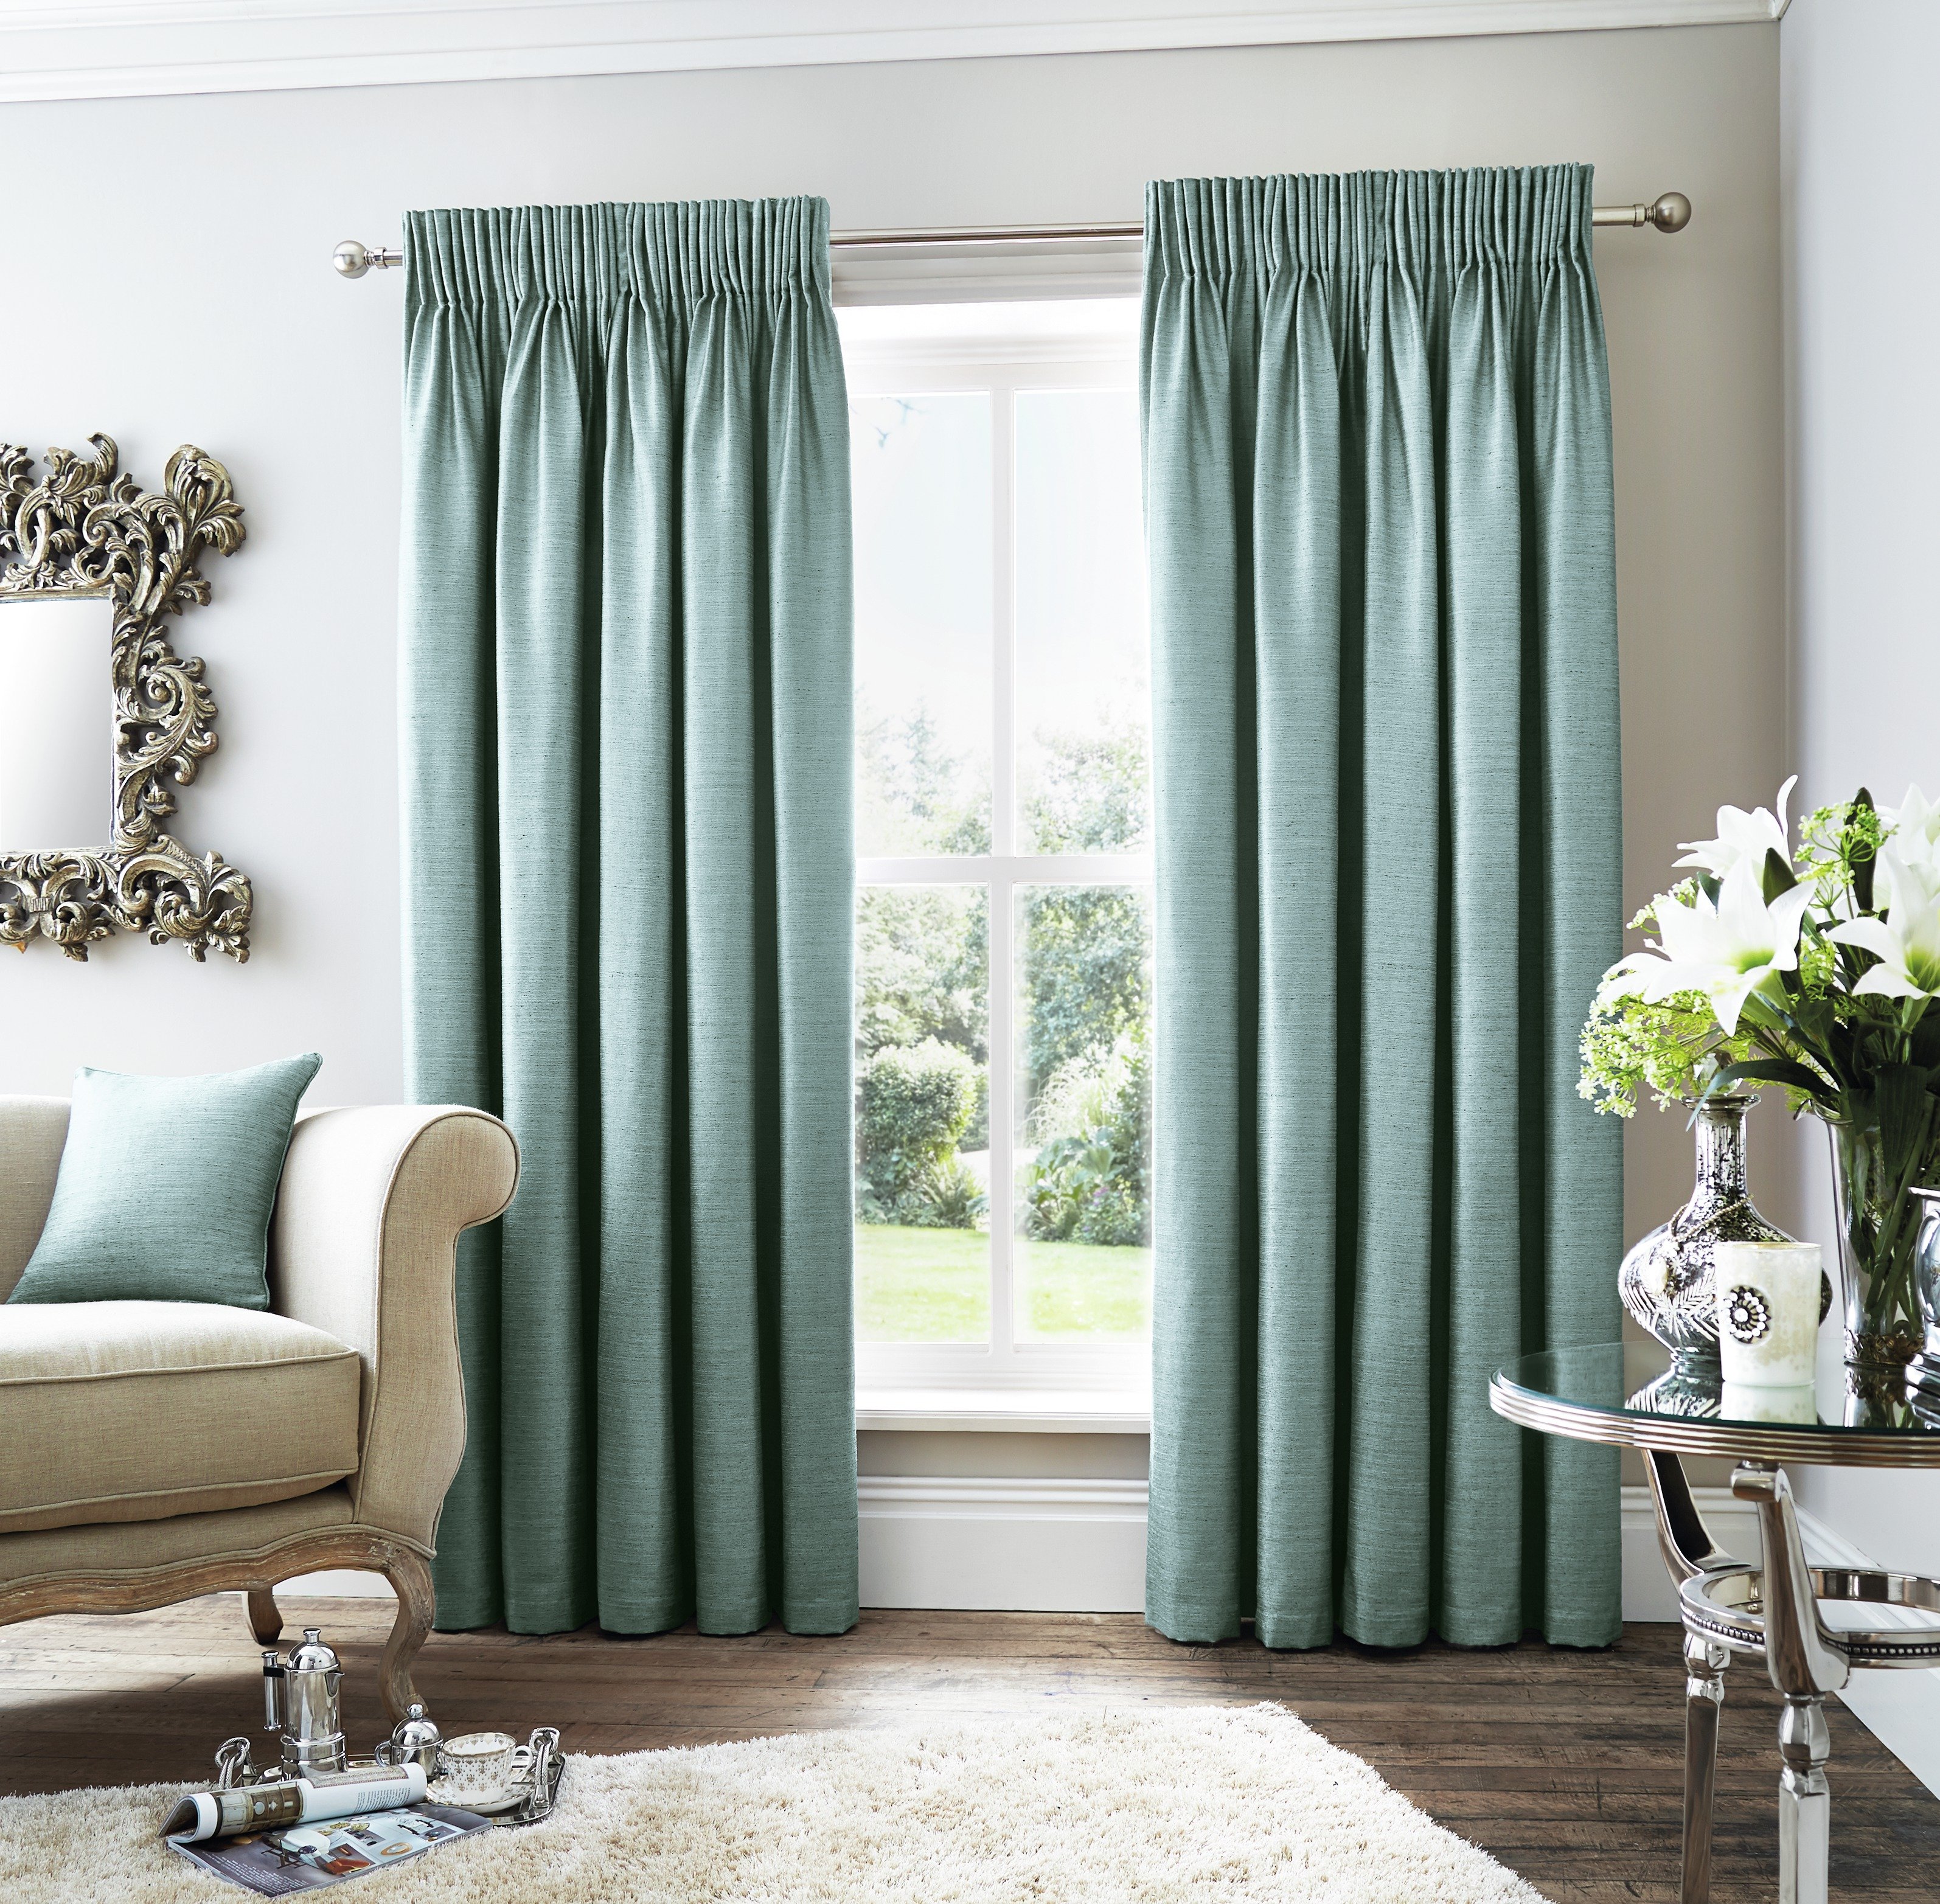 Lined Curtain Sale: Don't need to line up to take up these ...